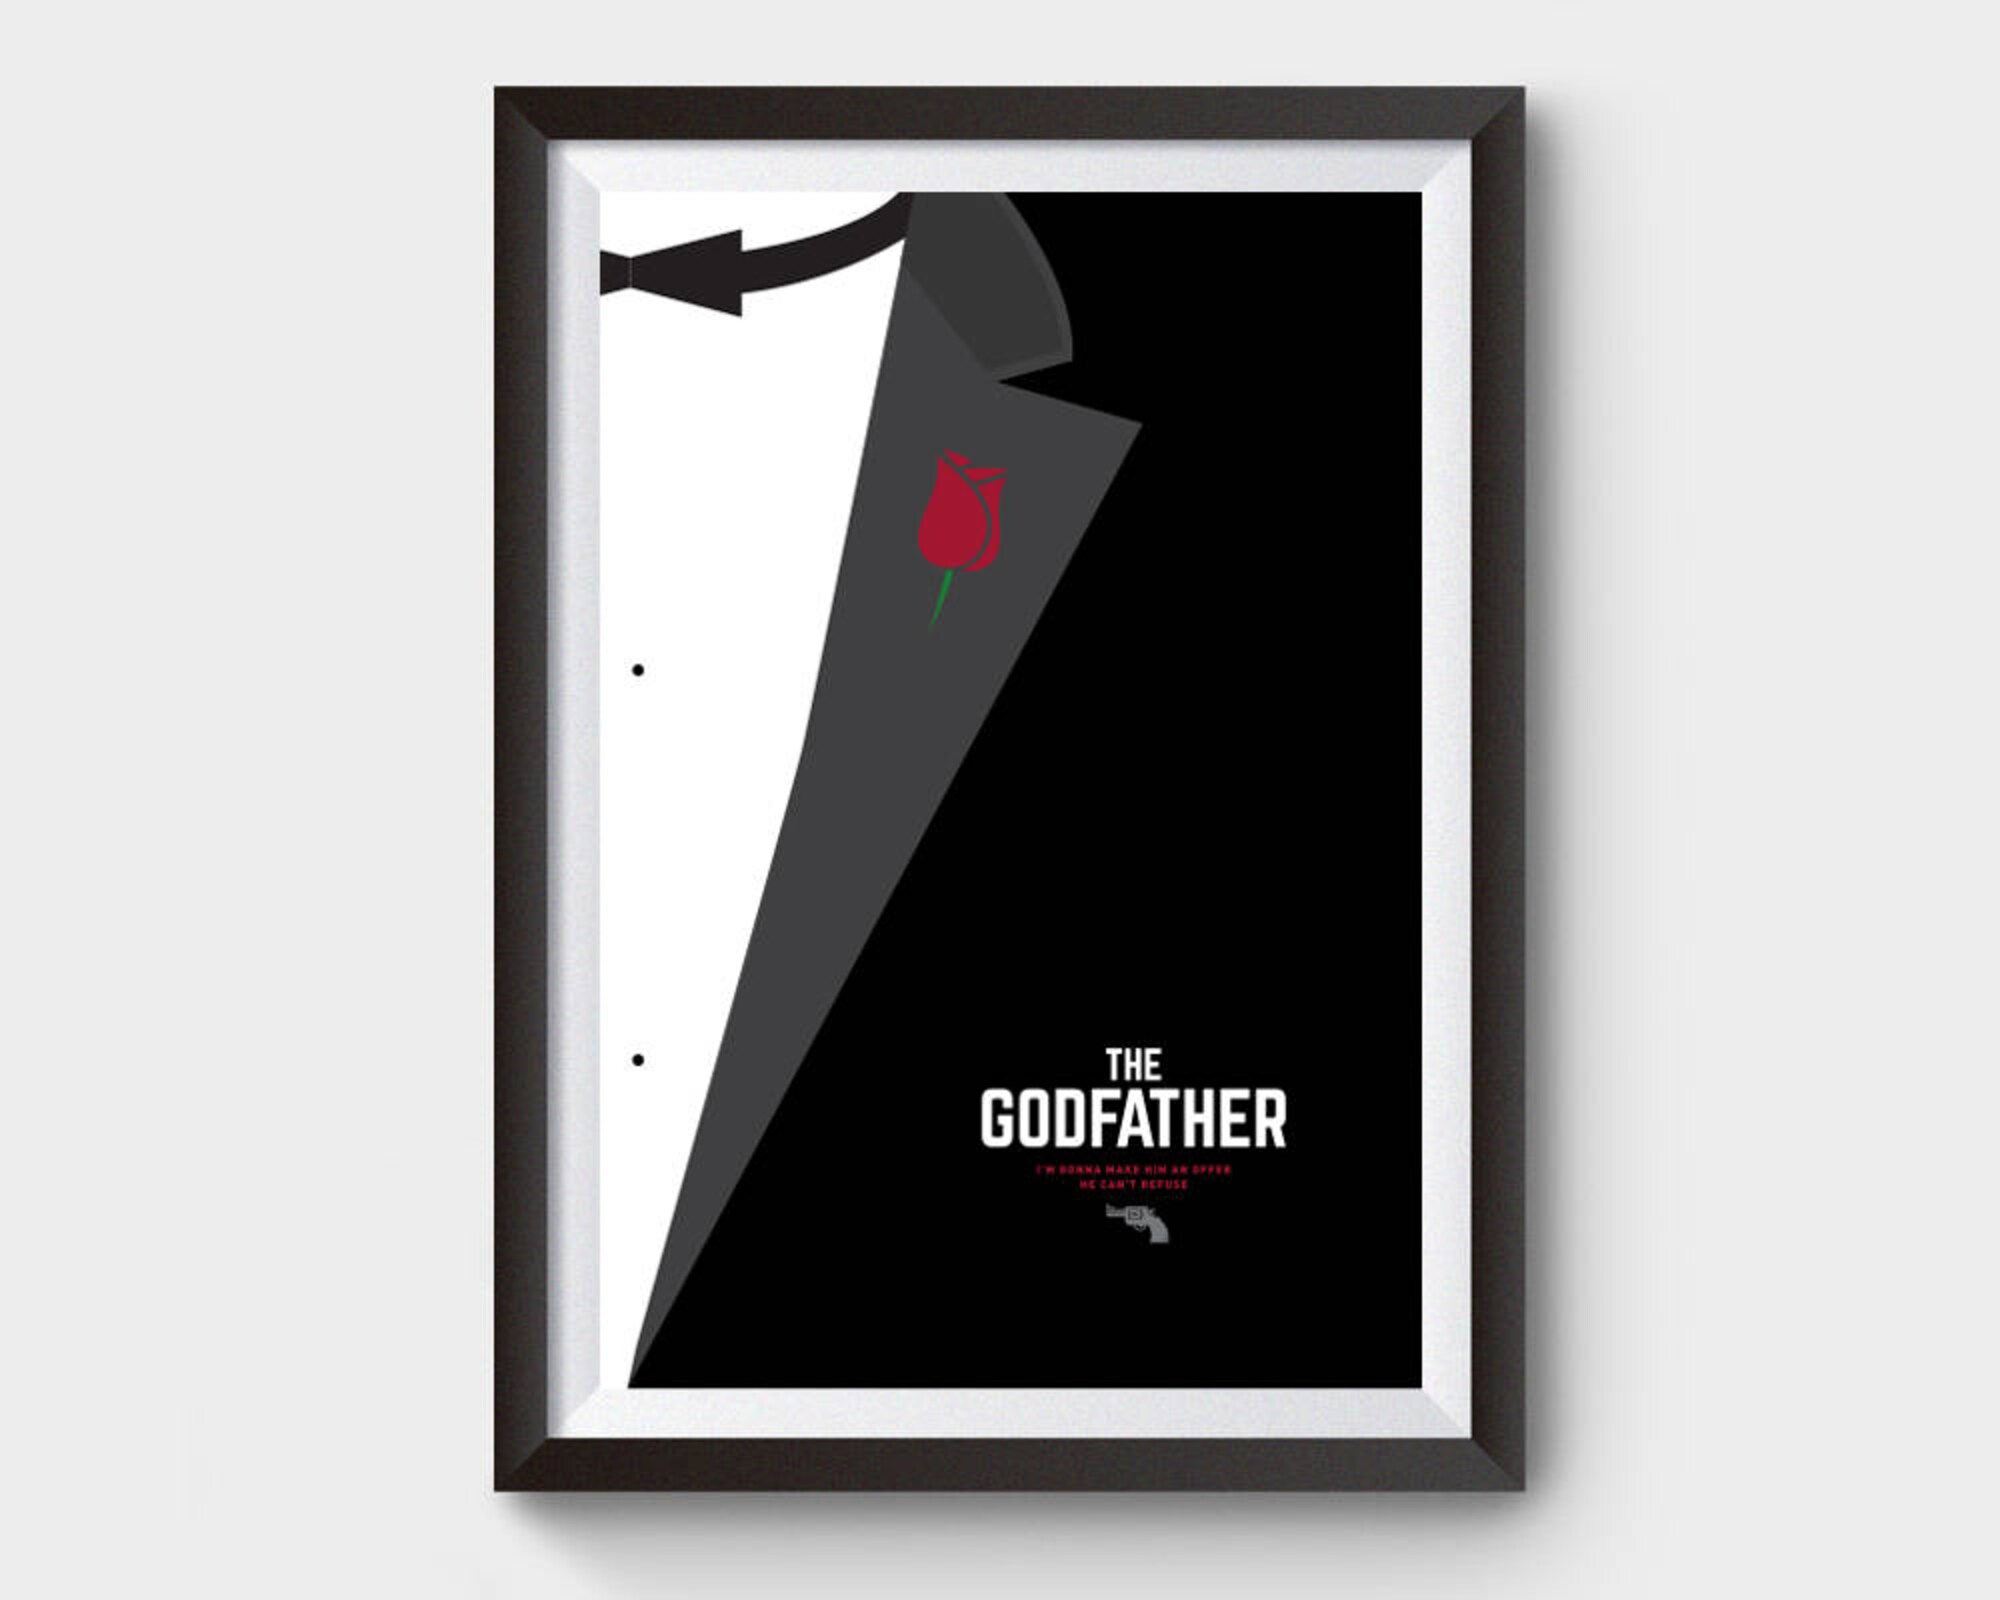 Discover The Godfather - A3 movie poster, film poster, minimal, minimalist movie poster